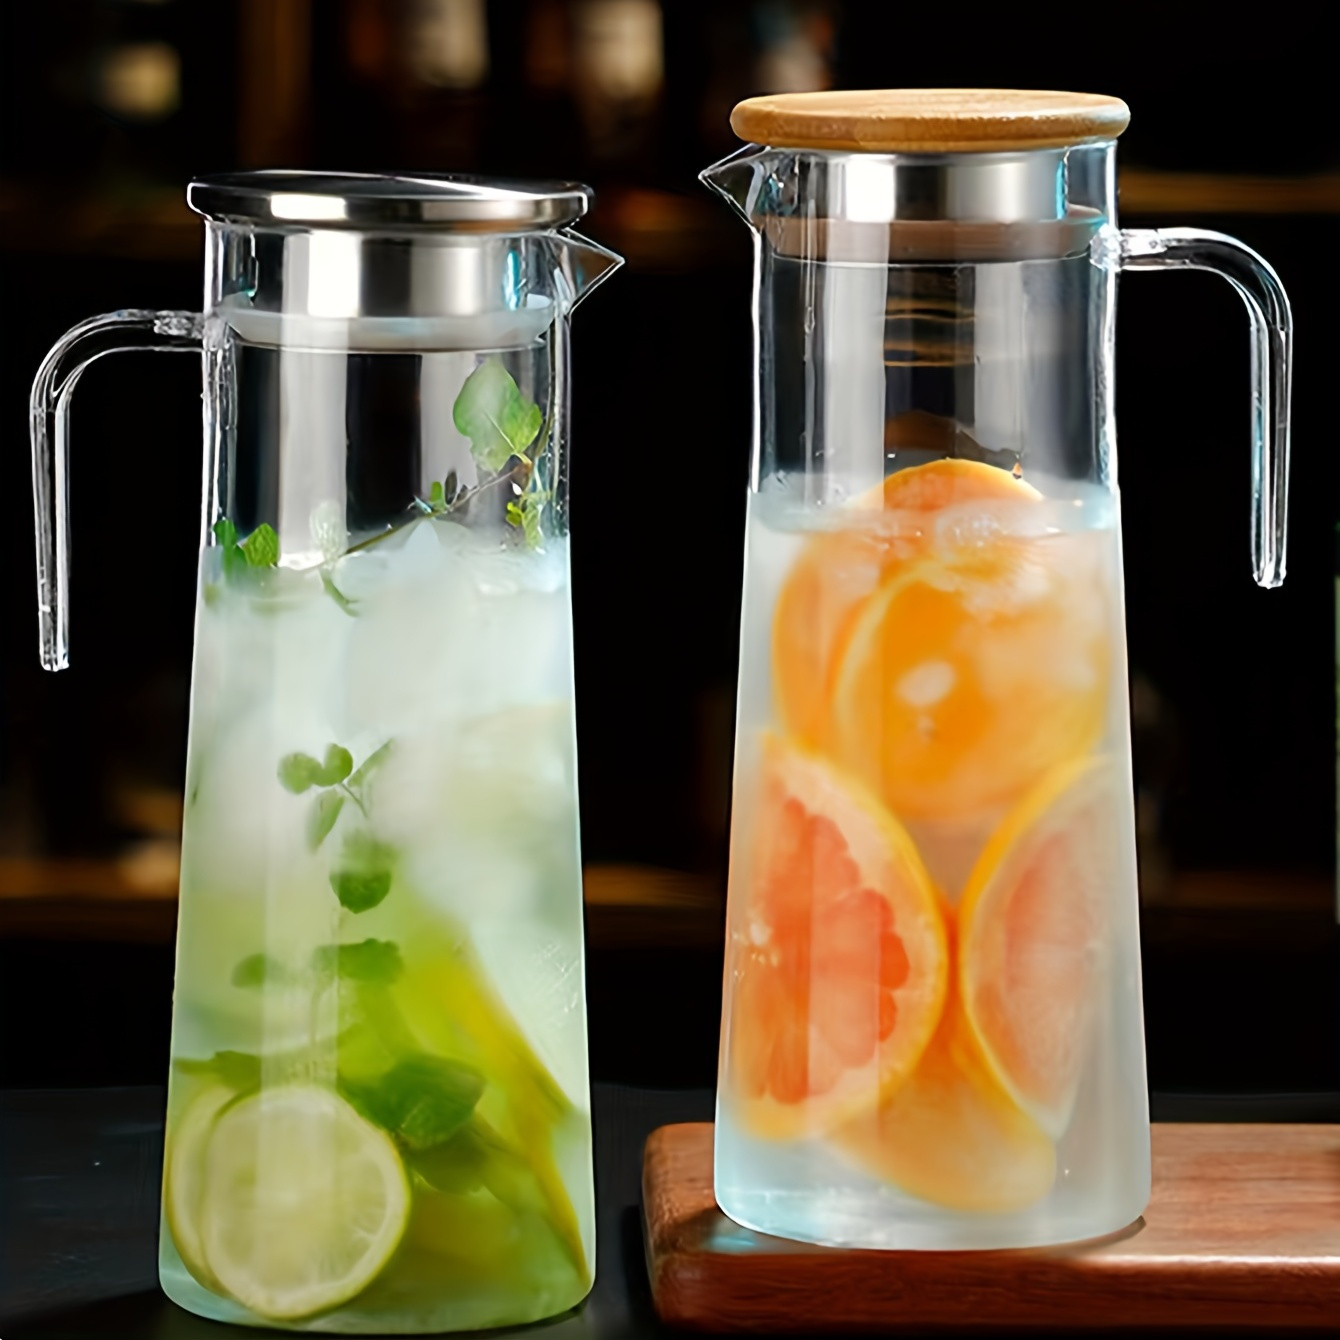 

1pc, Water Pitcher With Lid, 37.1oz/54.1oz Heavy Duty Drink Picher, With Stainless Steel Lid Or Wooden Lid, For Juice, Bubble Tea, Summer Drinkware, Kitchen Stuff, Home Kitchen Items, Birthday Gifts